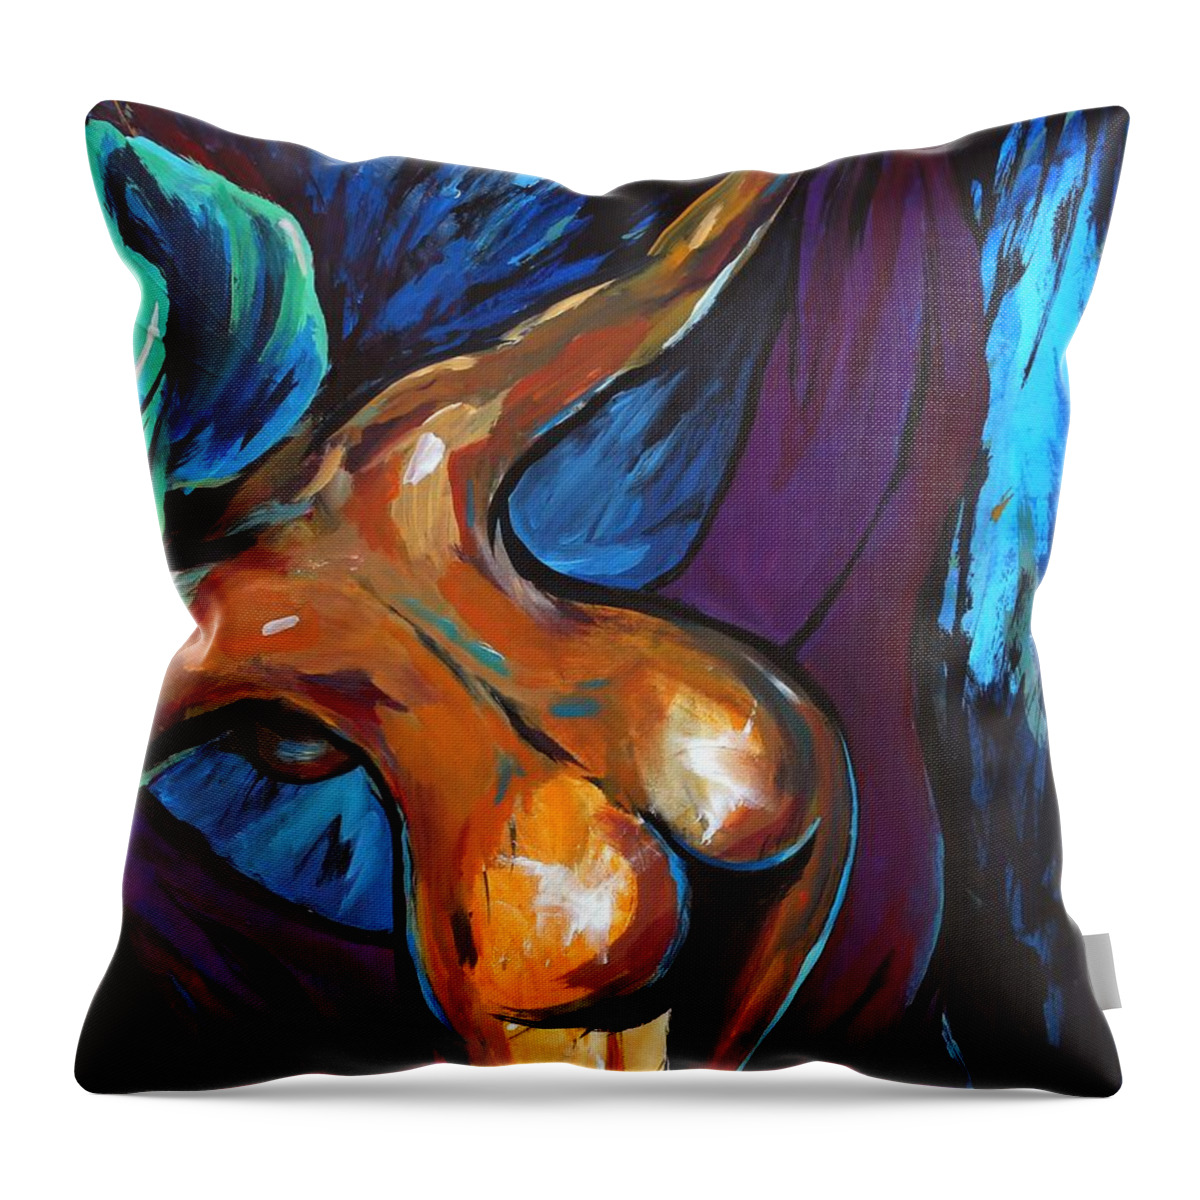 Nude Woman Throw Pillow featuring the painting My Mother's Towels by Lucy West